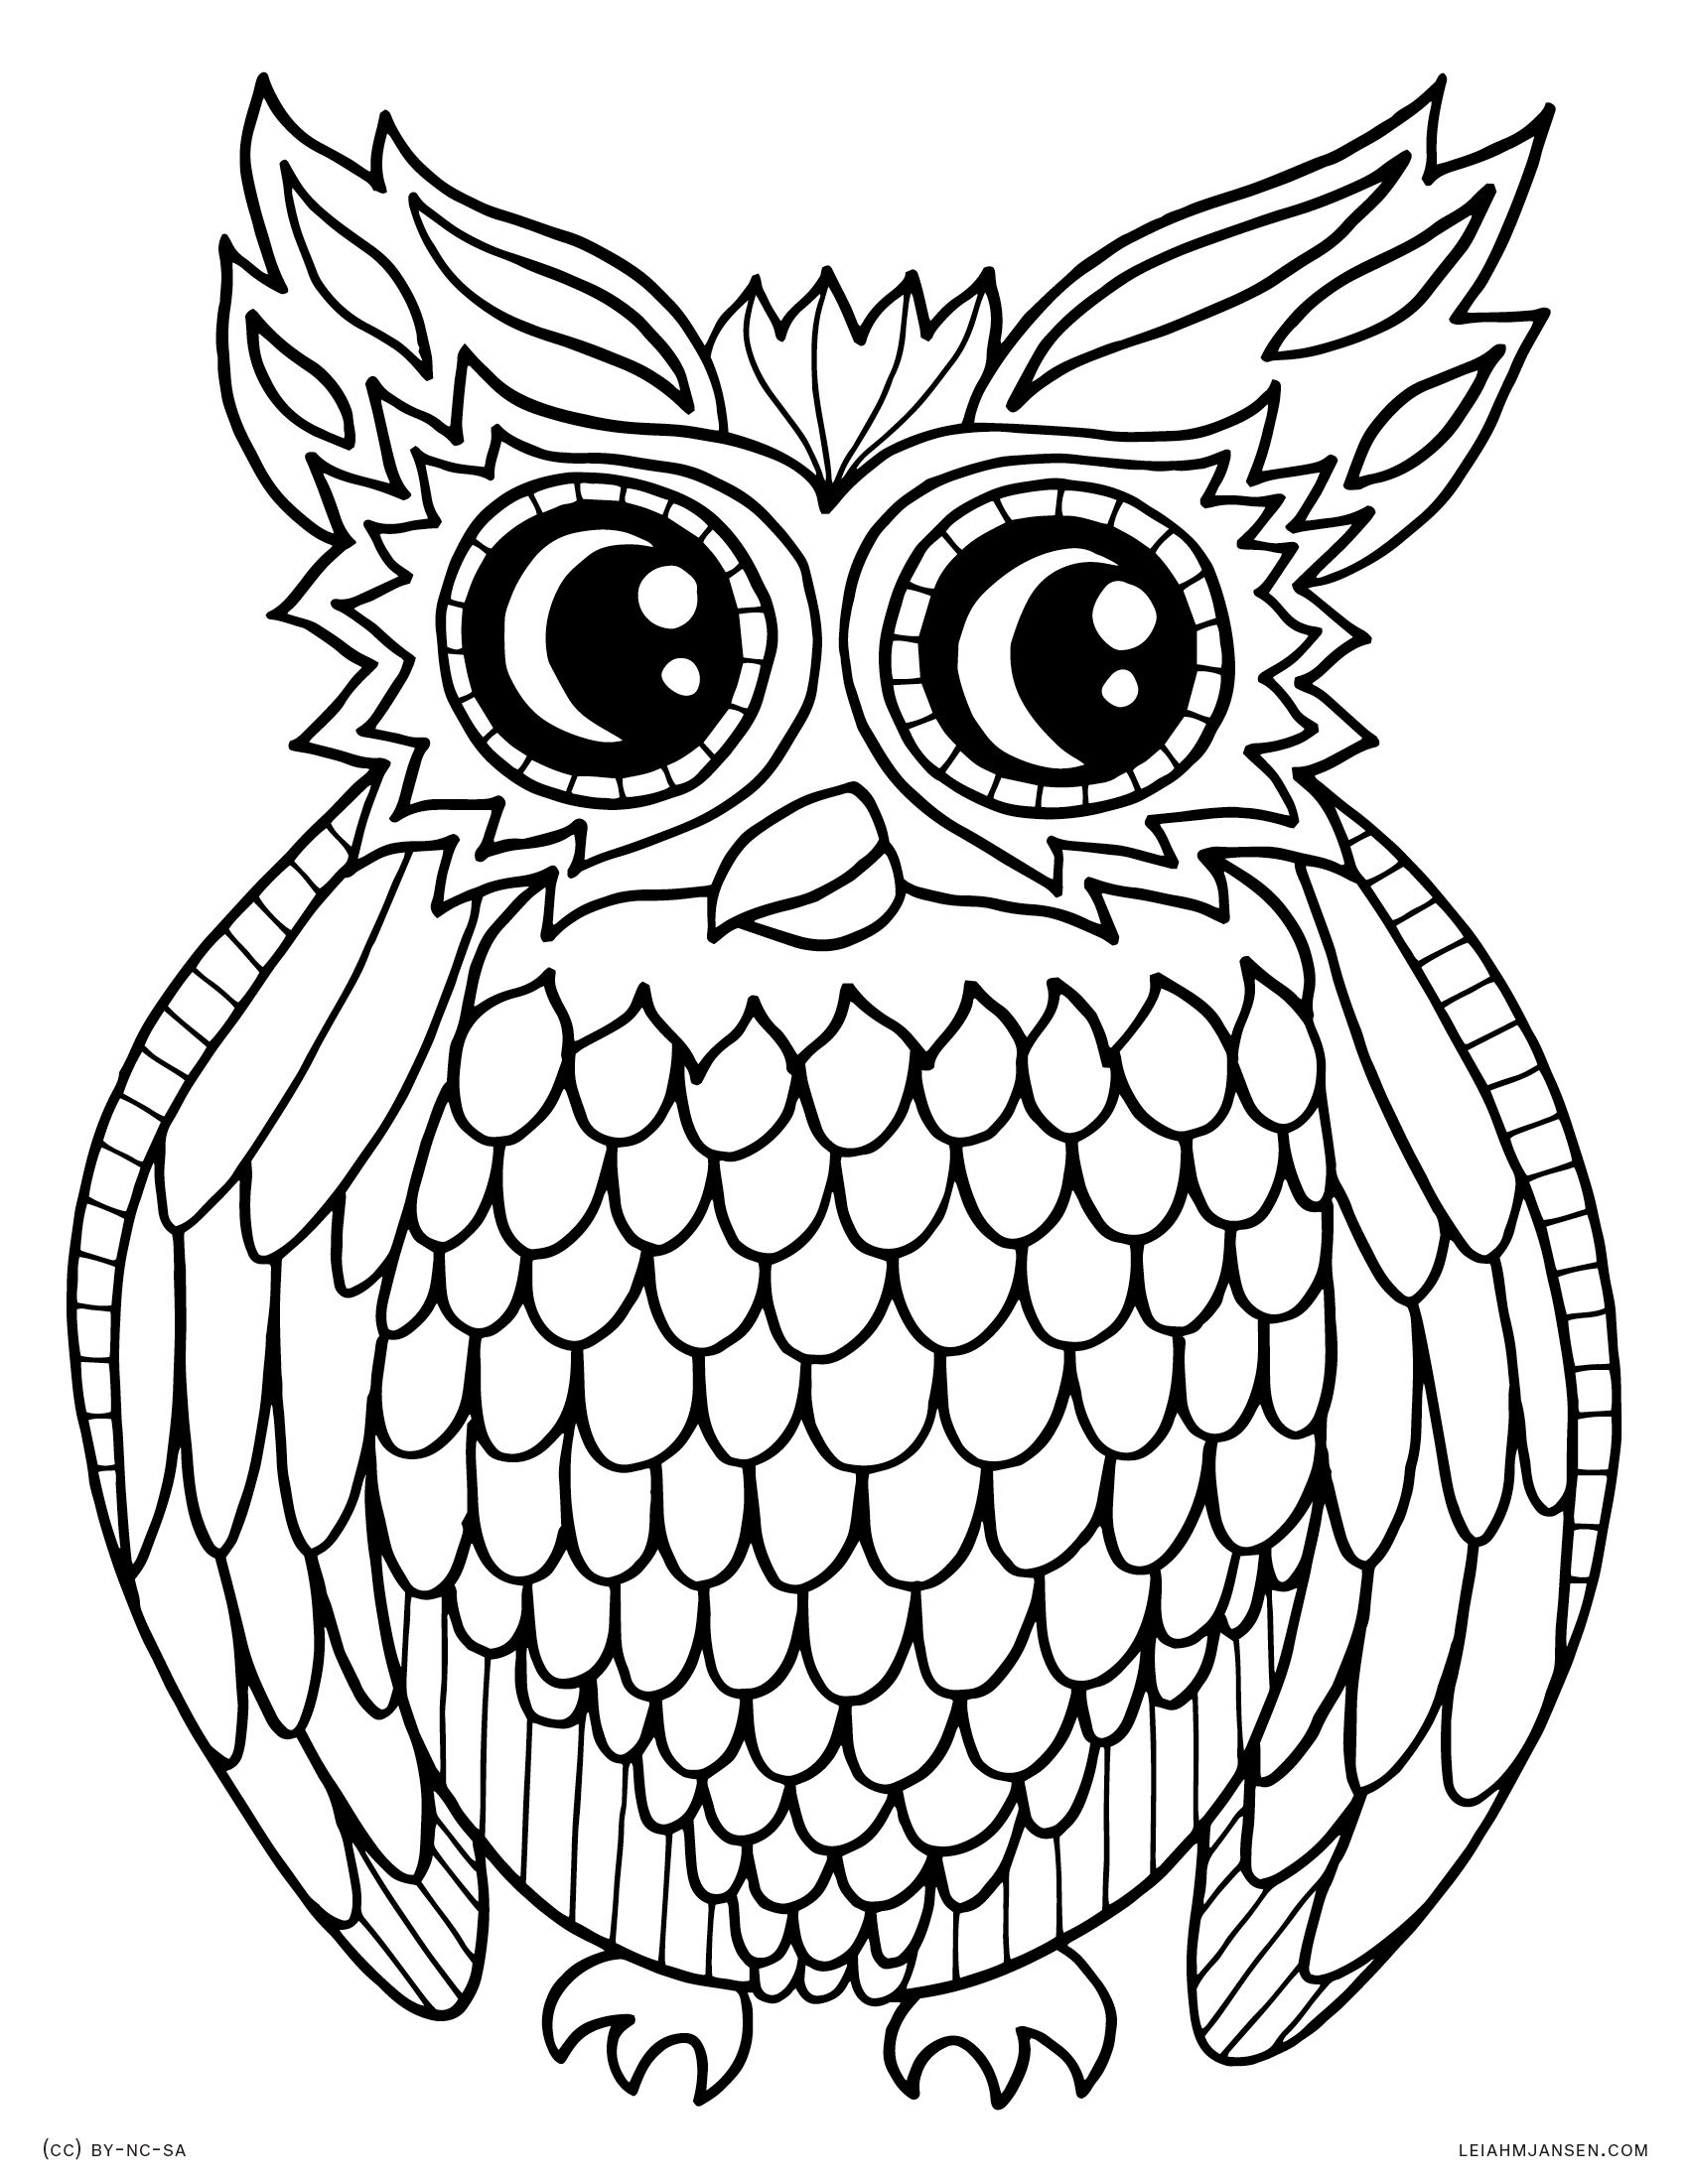 Animal Owl Coloring Pages For Adults / More and more people of all ages